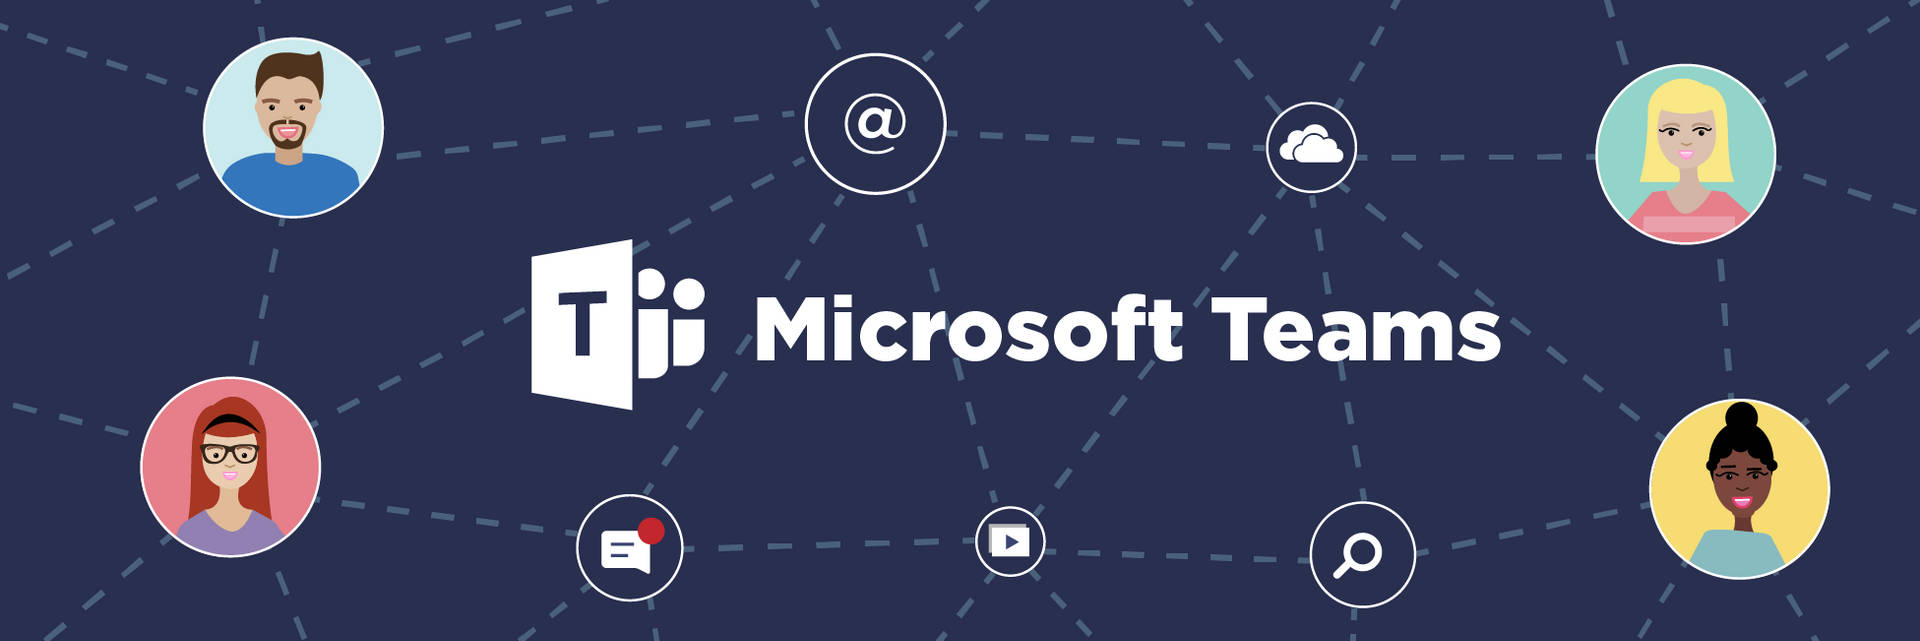 Microsoft Teams Banner Widescreen Background